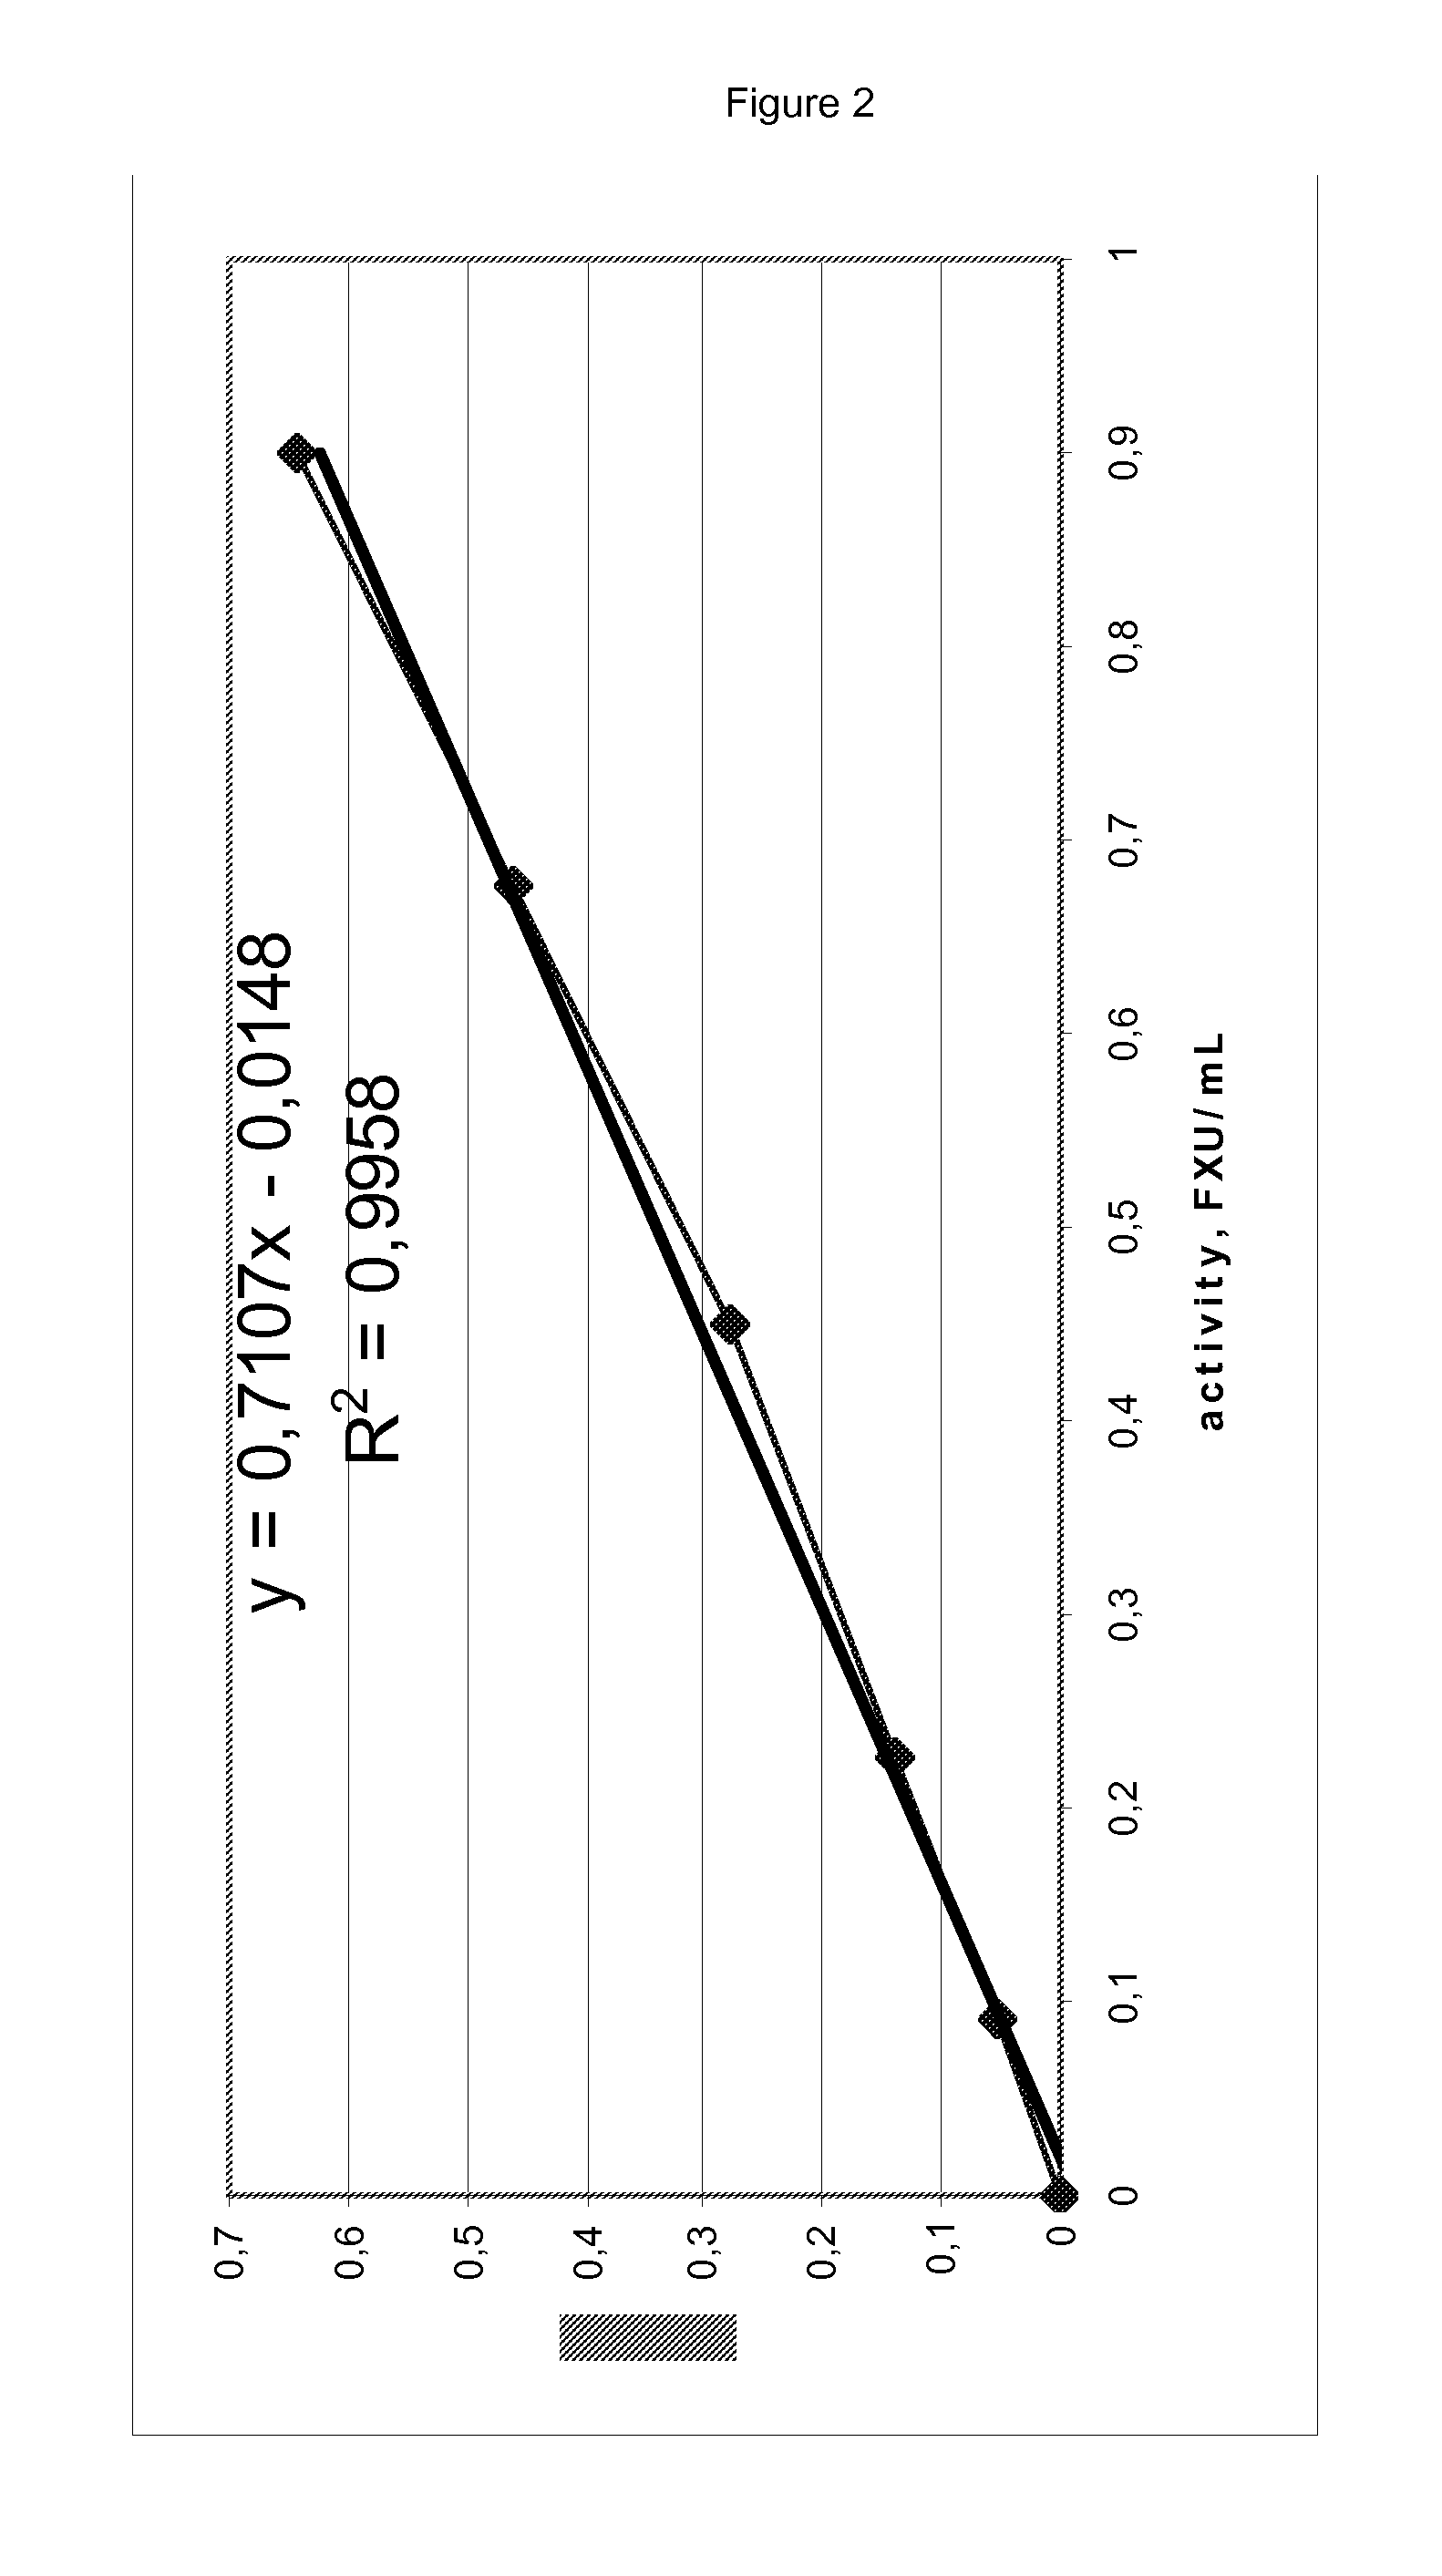 Methods of Producing GH8 Xylanase Variants